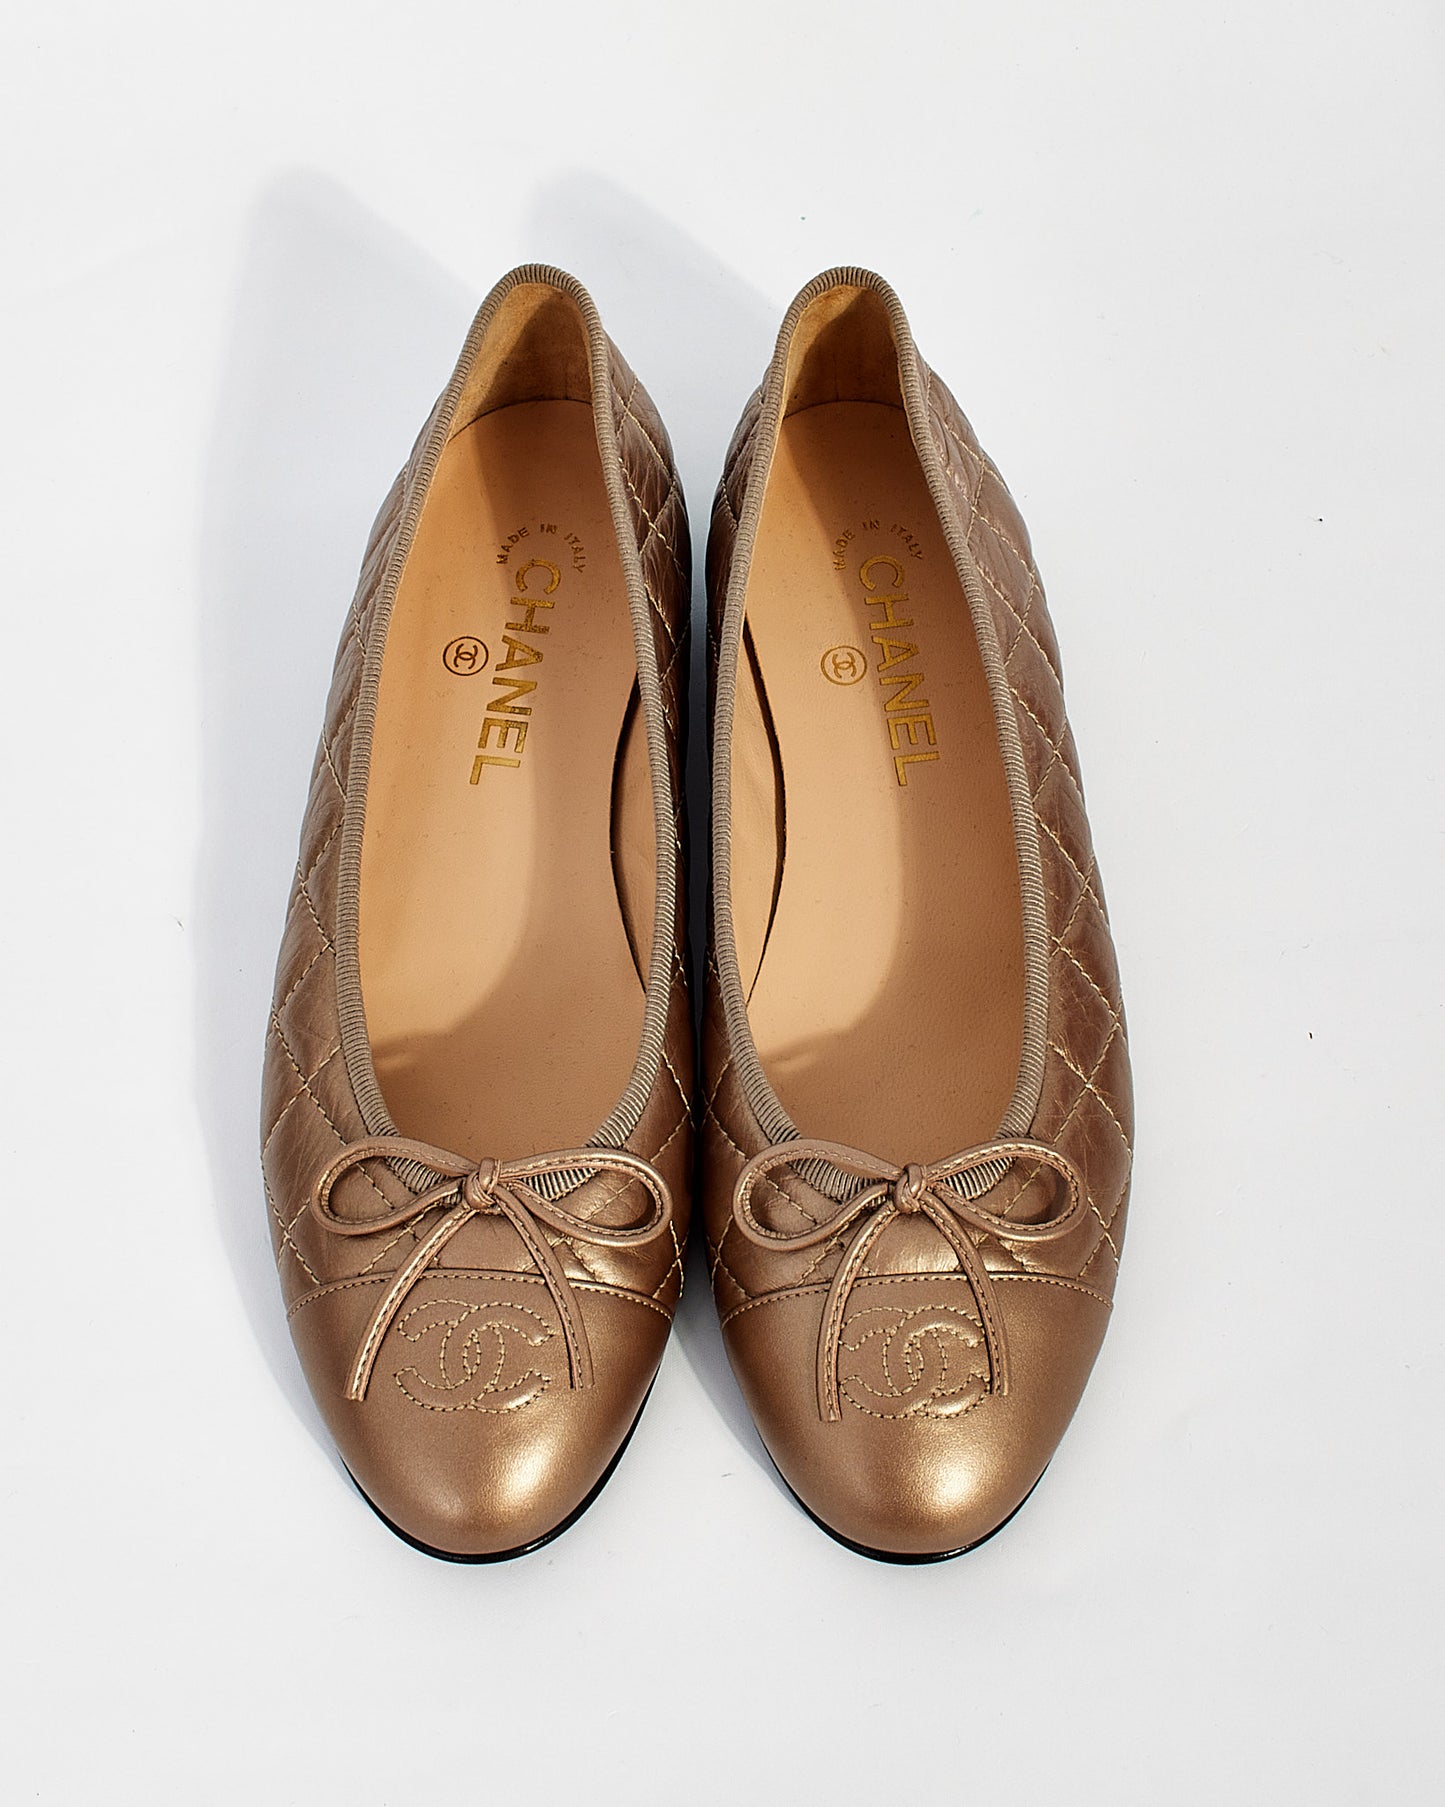 Chanel Metallic Bronze Quilted Leather CC Ballerina Flats - 39.5